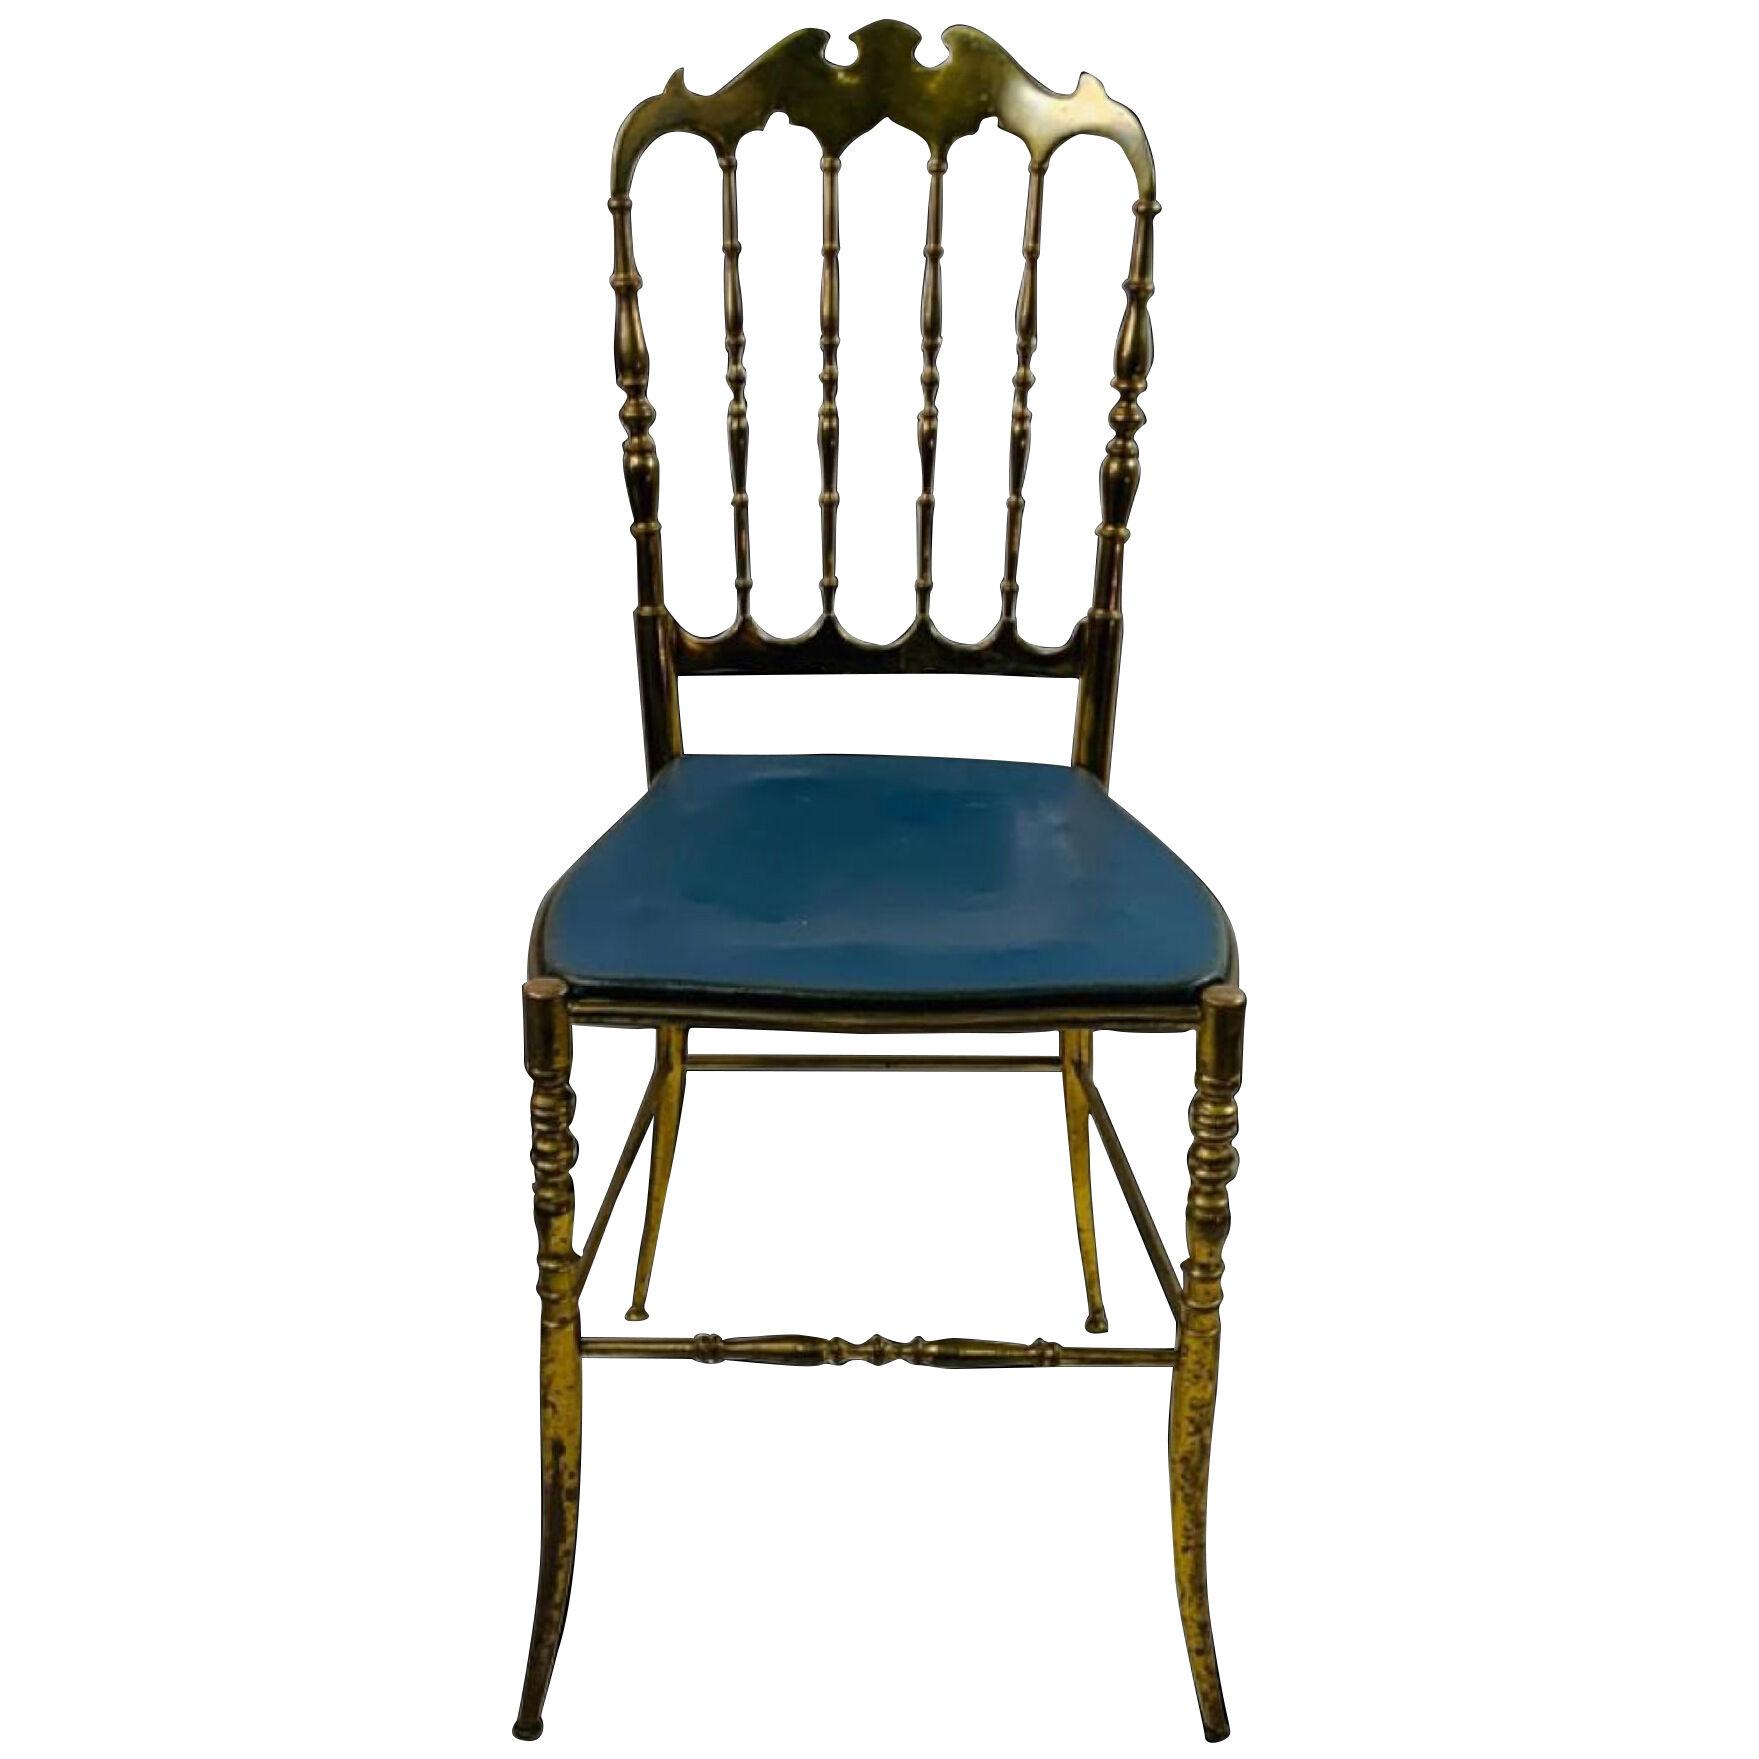 Vintage Solid Blue Leather Upholstered Brass Chiavari Chair